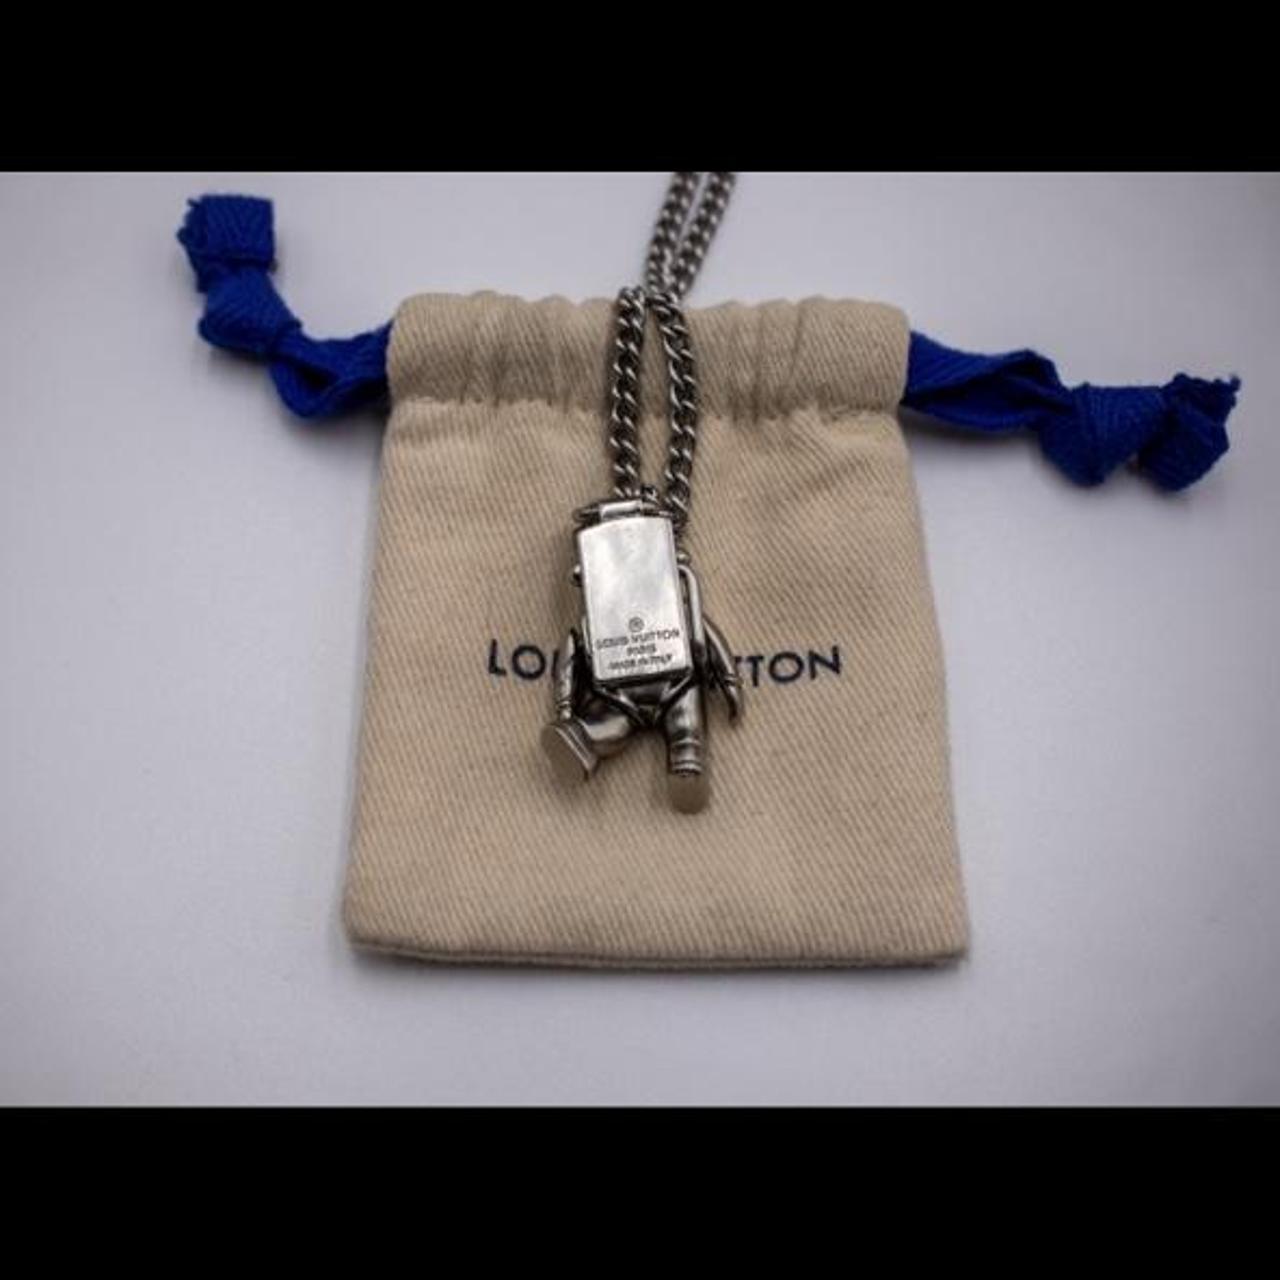 Hype_disease - LV astronaut necklace Price: XXX Dm if looking for